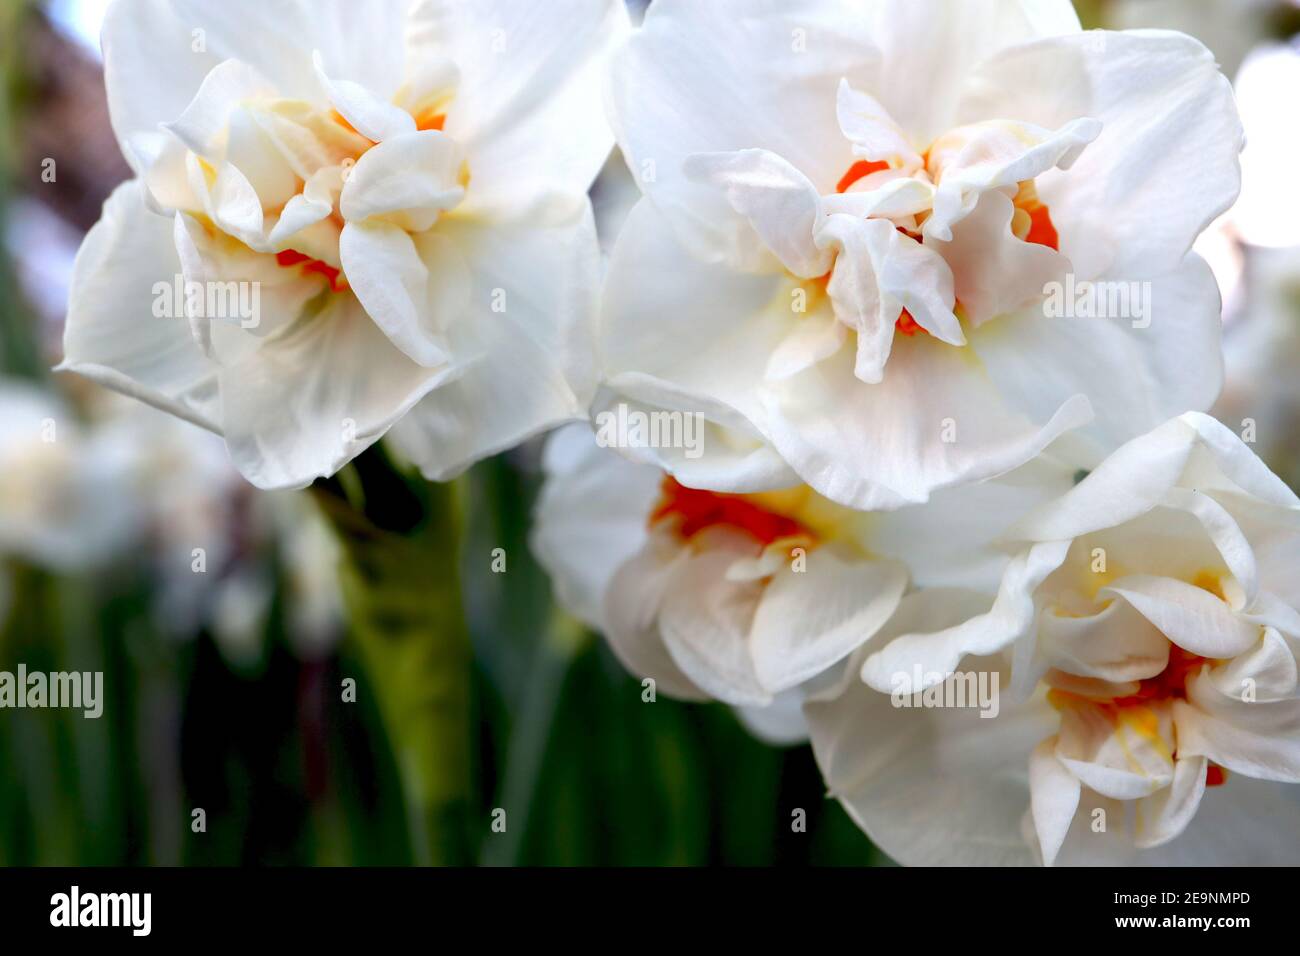 Narcissus Erlicheer / Daffodil Early Cheer Division 4 Double Daffodils - highly scented white double daffodils with orange segments, February, Stock Photo